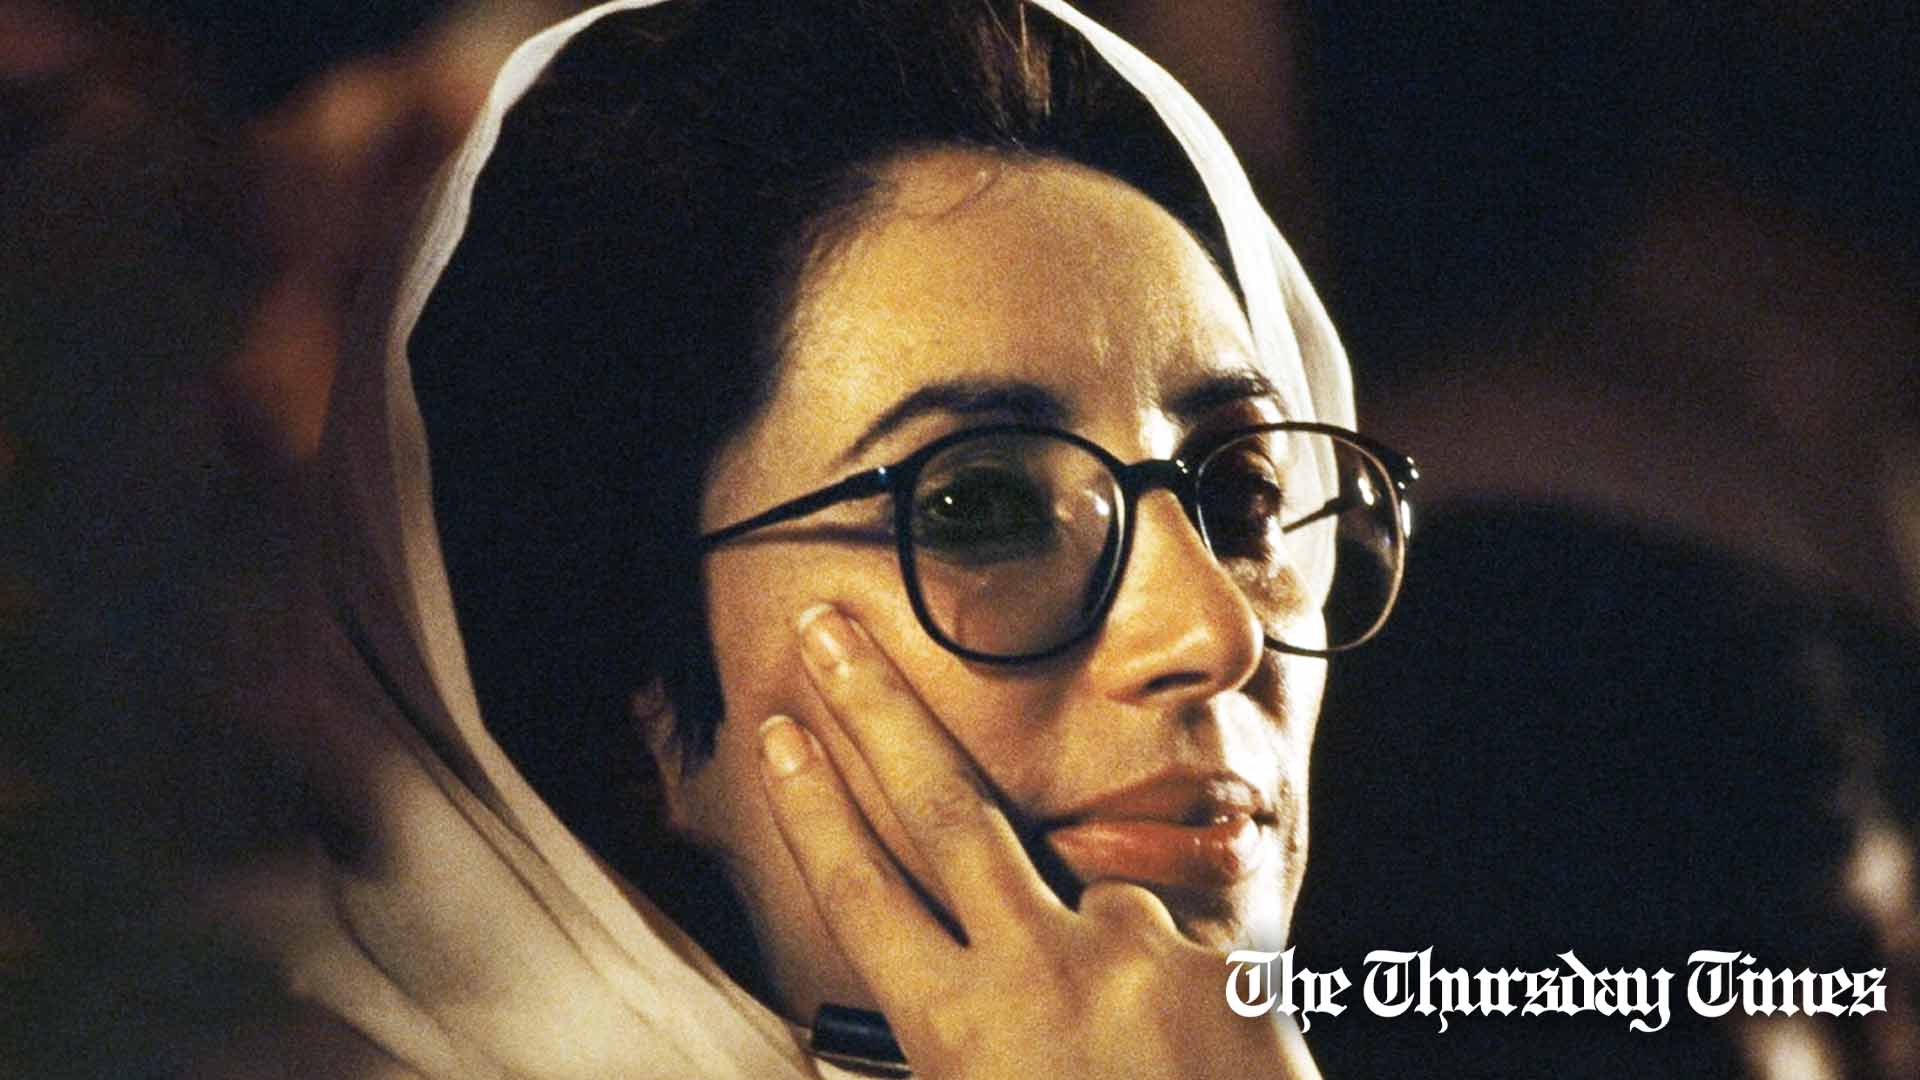 Former prime minister Benazir Bhutto is shown at Rawalpindi in 1991. — FILE